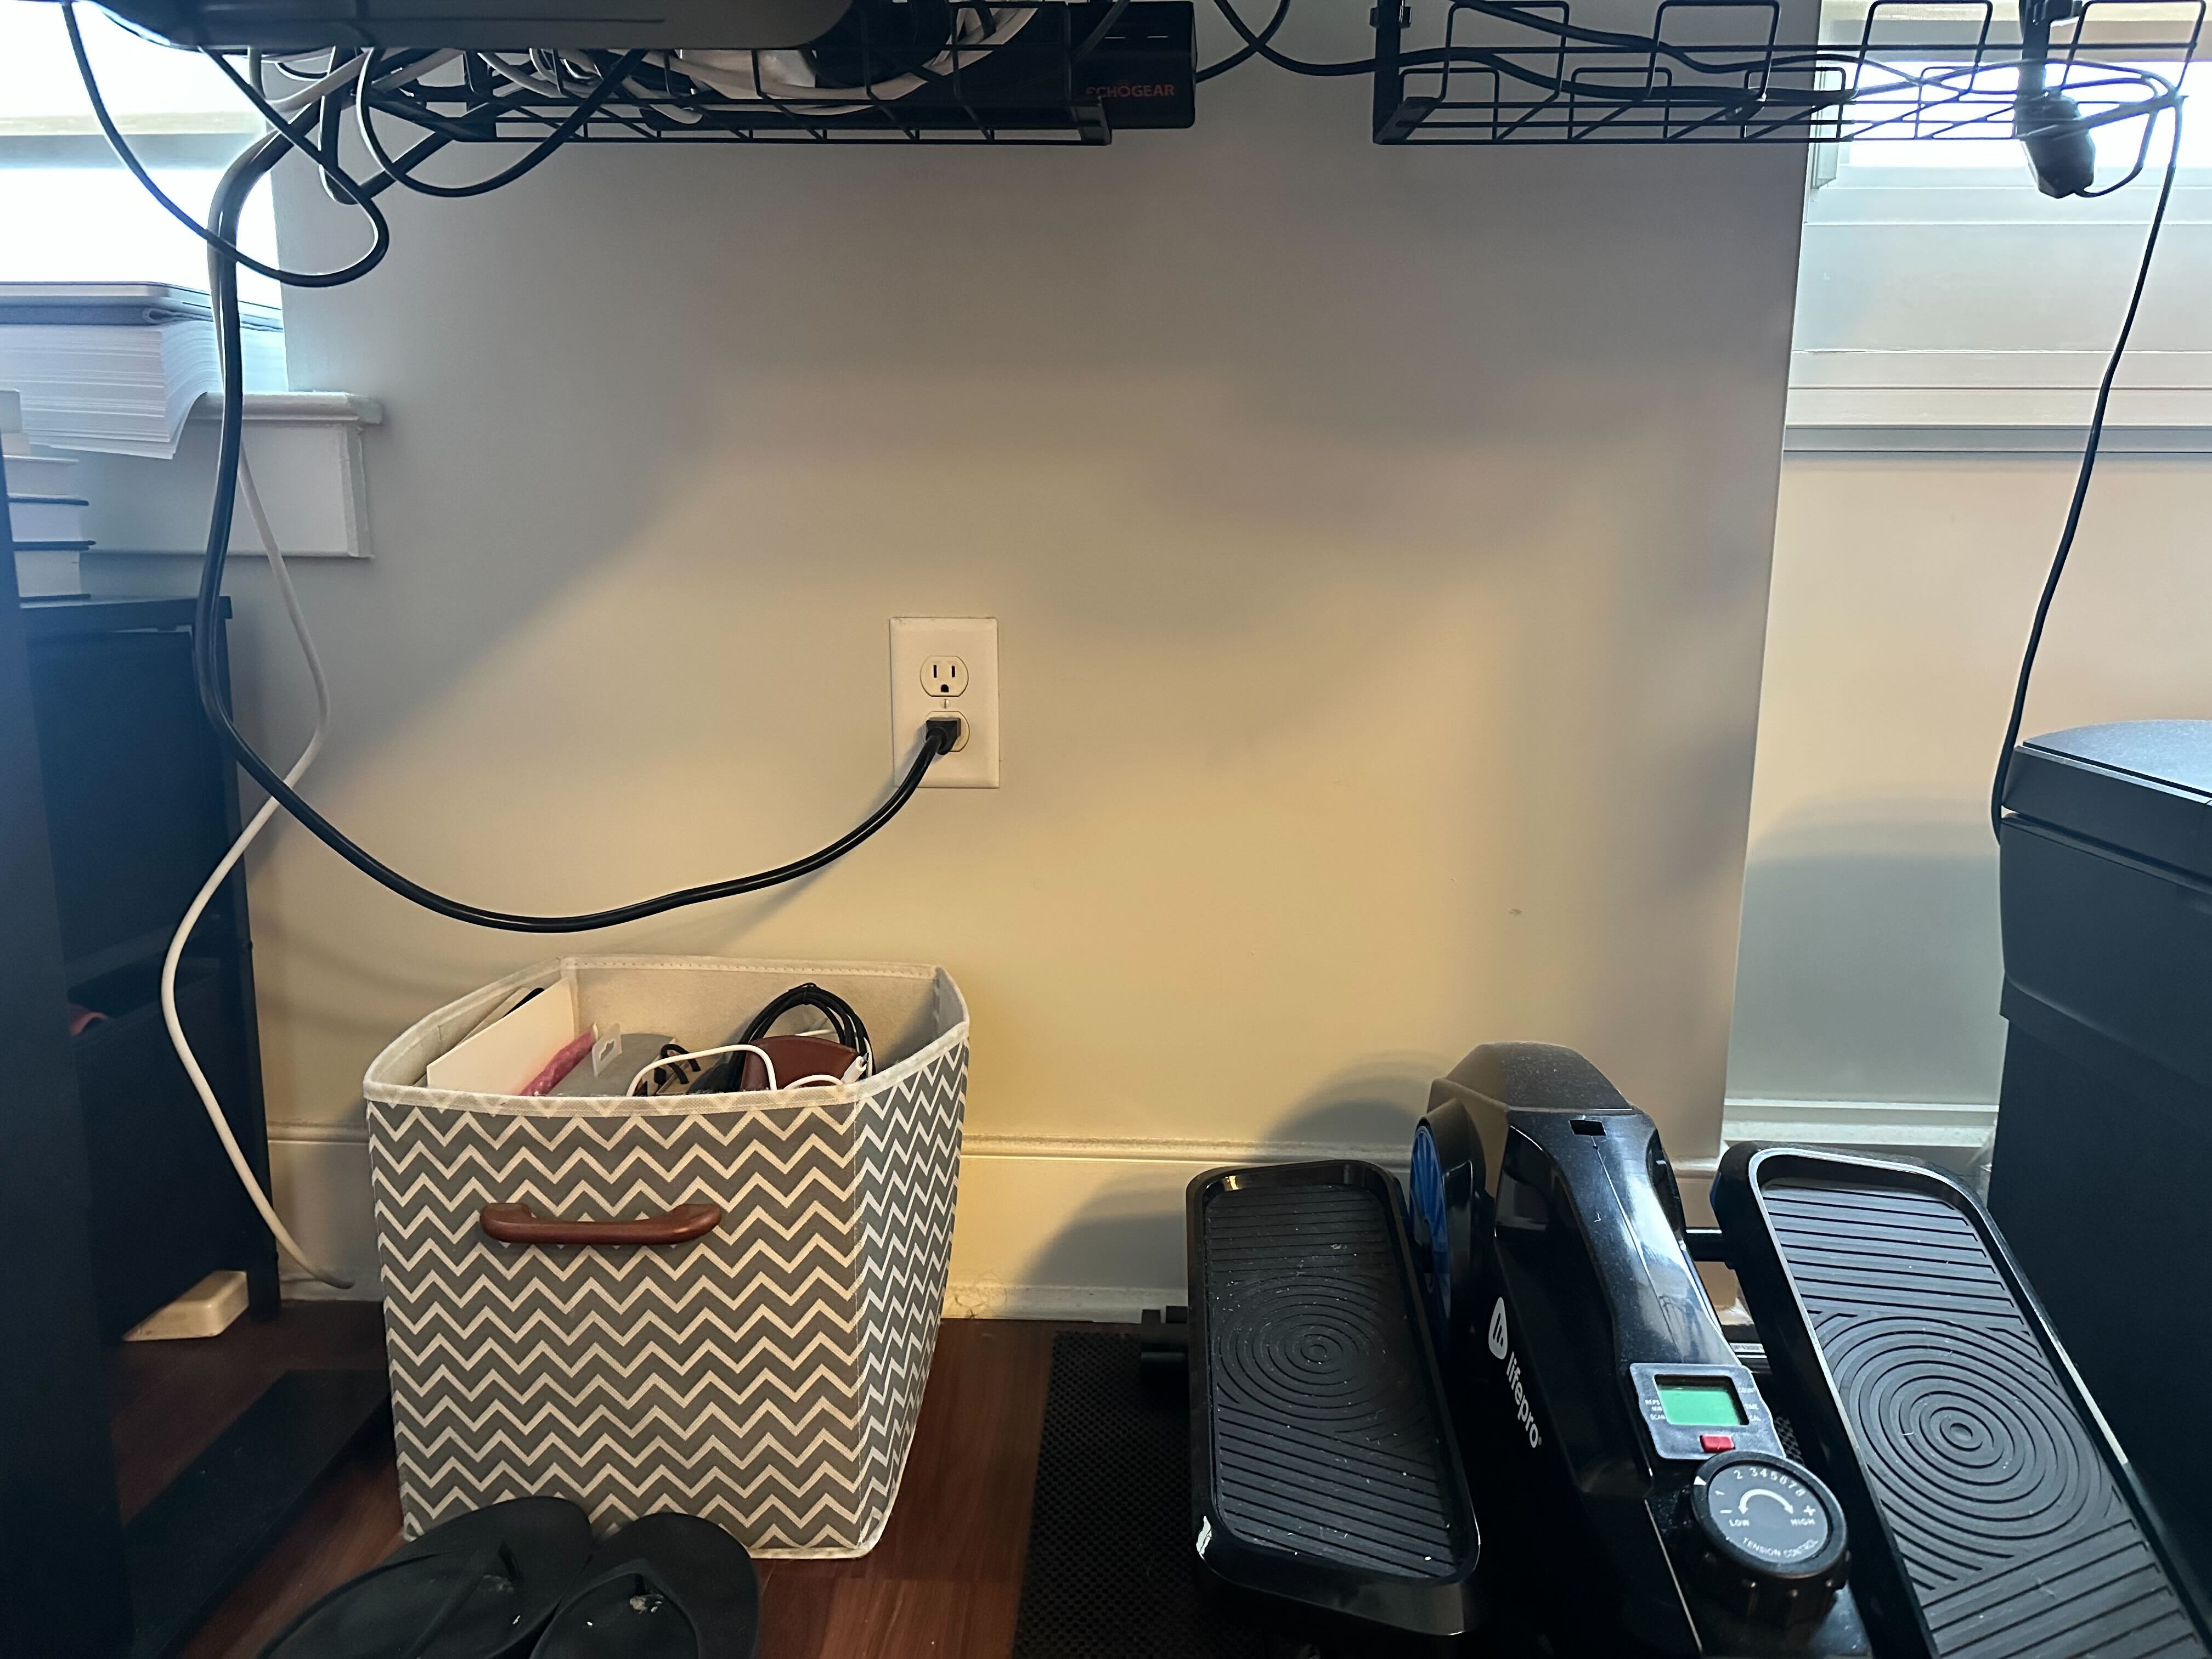 https://cdn.apartmenttherapy.info/image/upload/v1680106661/commerce/tyrkuiy-no-drill-under-desk-cable-management-tray-s-vazquez.jpg